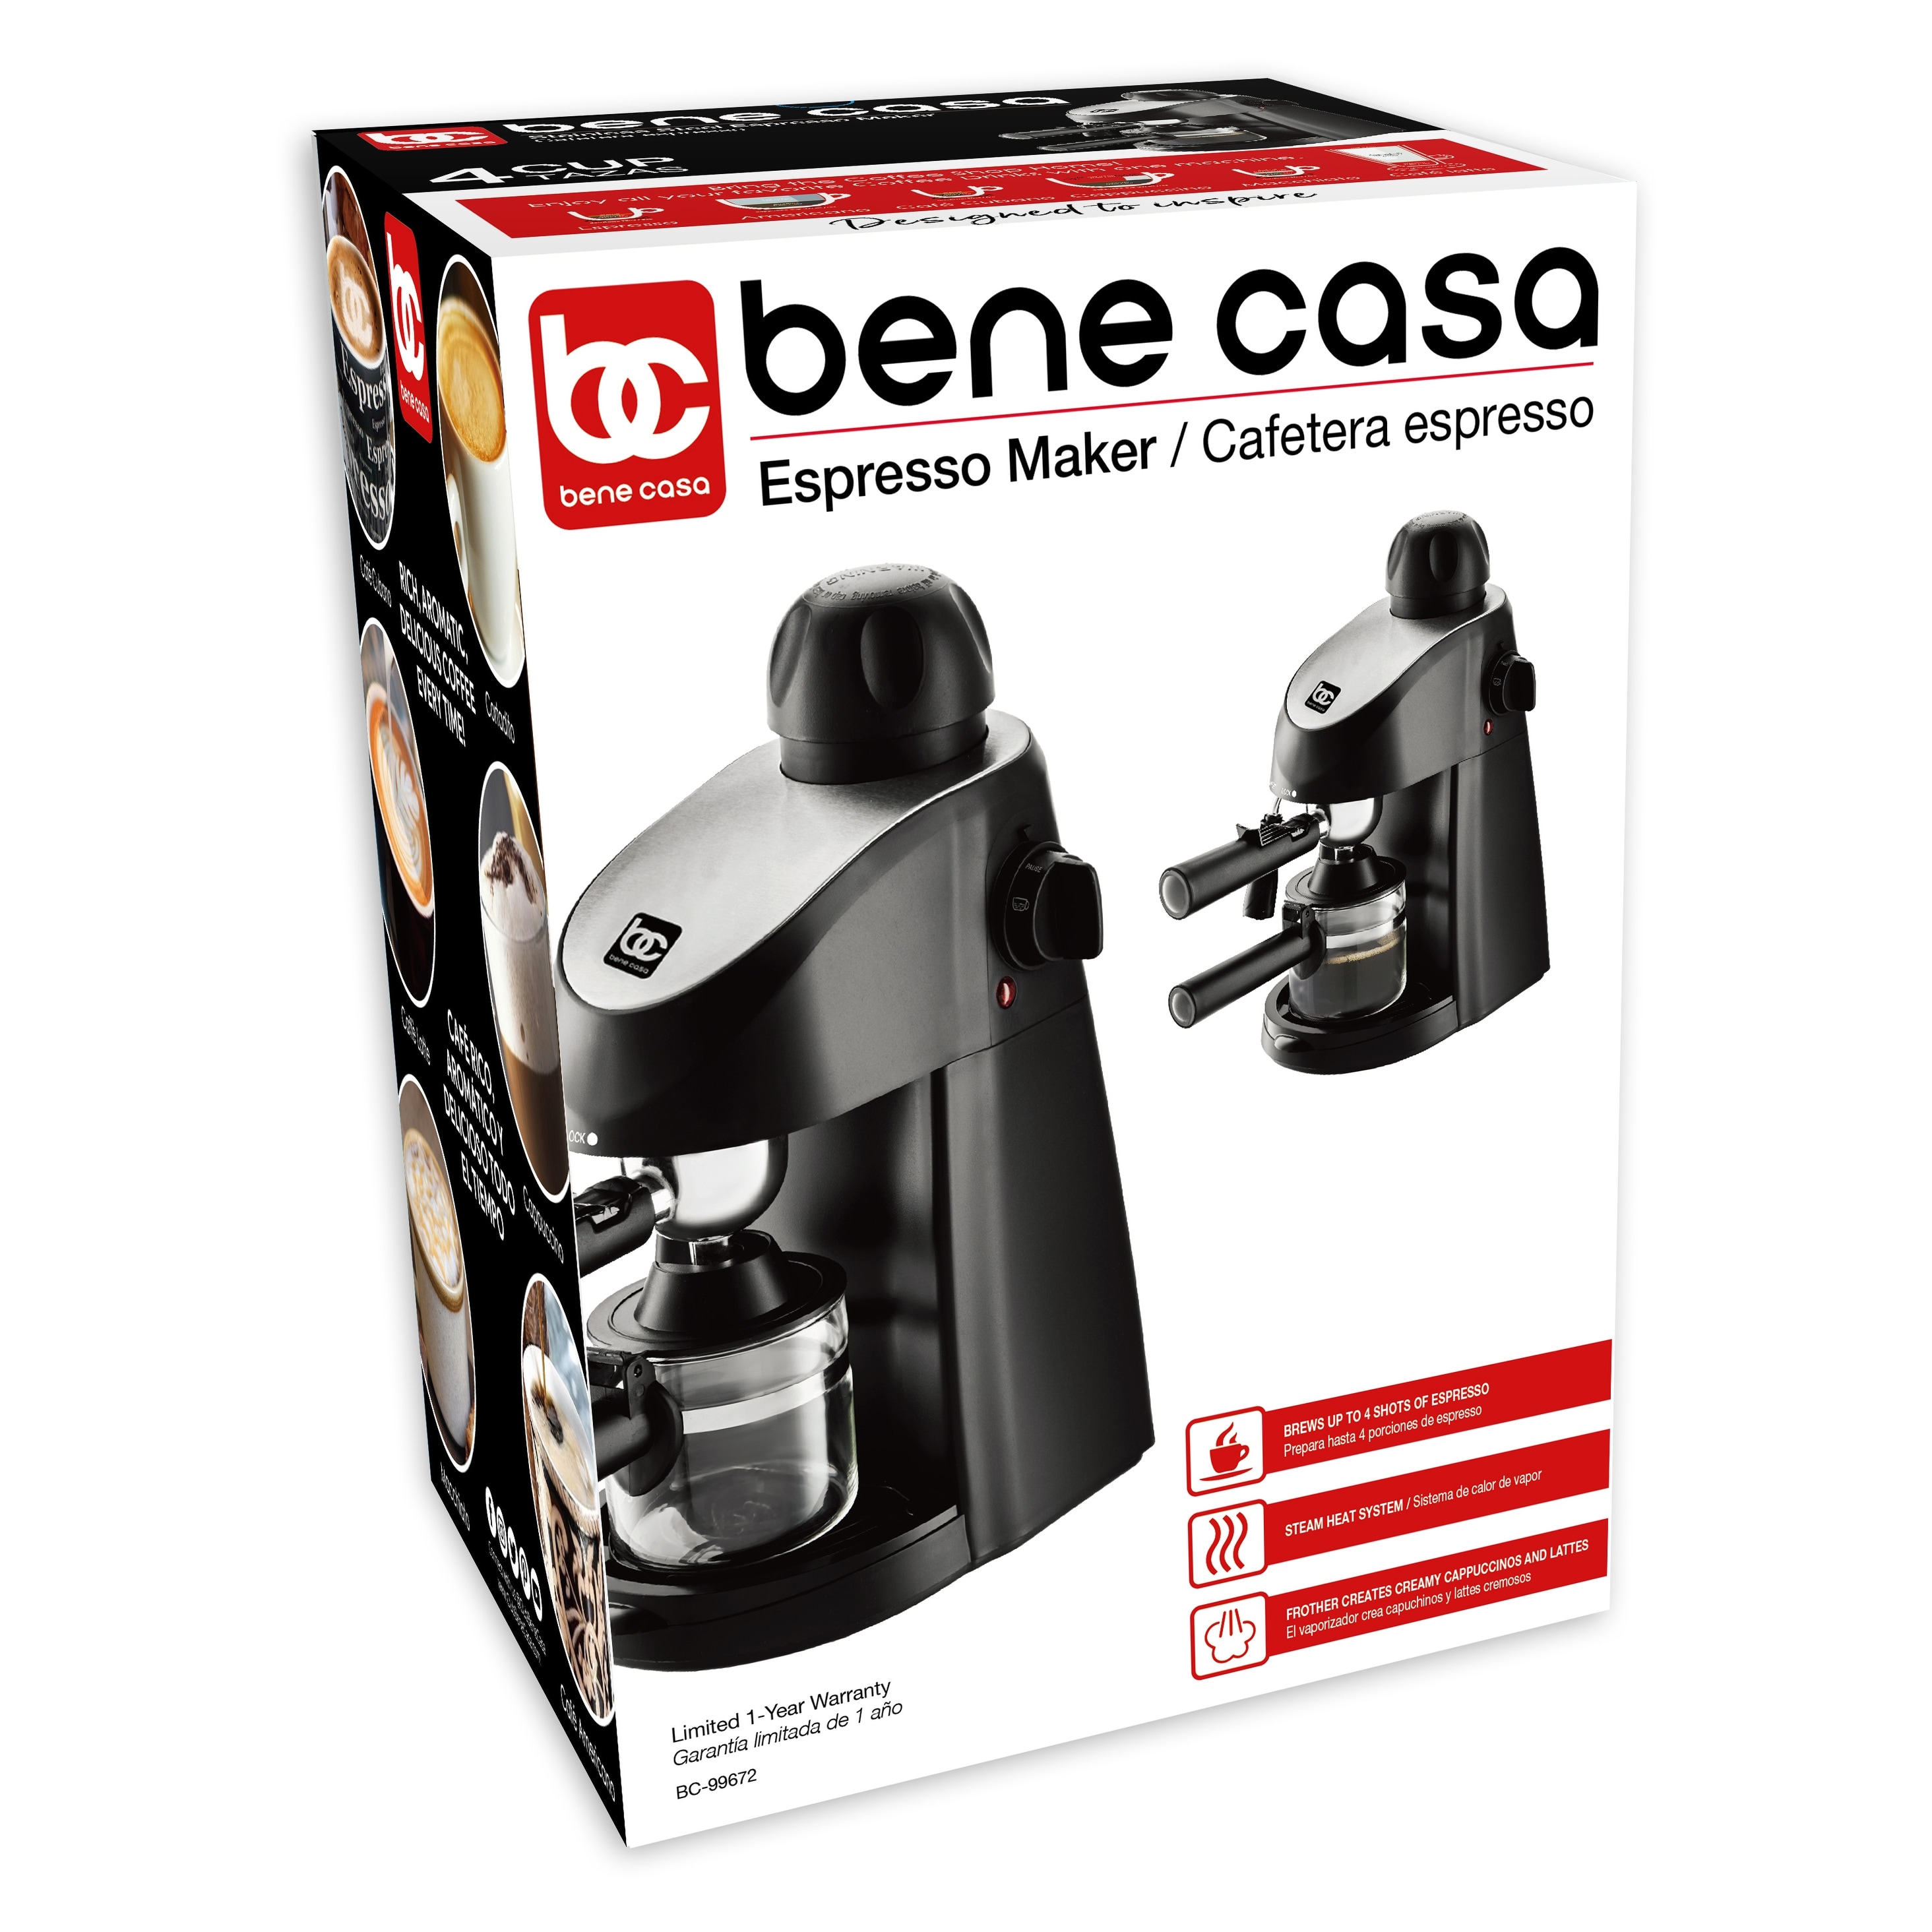 https://ak1.ostkcdn.com/images/products/is/images/direct/87ed29e9ebc18c45442f805d28f5f3f87f301ec0/Bene-Casa-4-cup-espresso-maker%2C-black%2C-milk-frother%2C-glass-carafe-coffee-maker.jpg